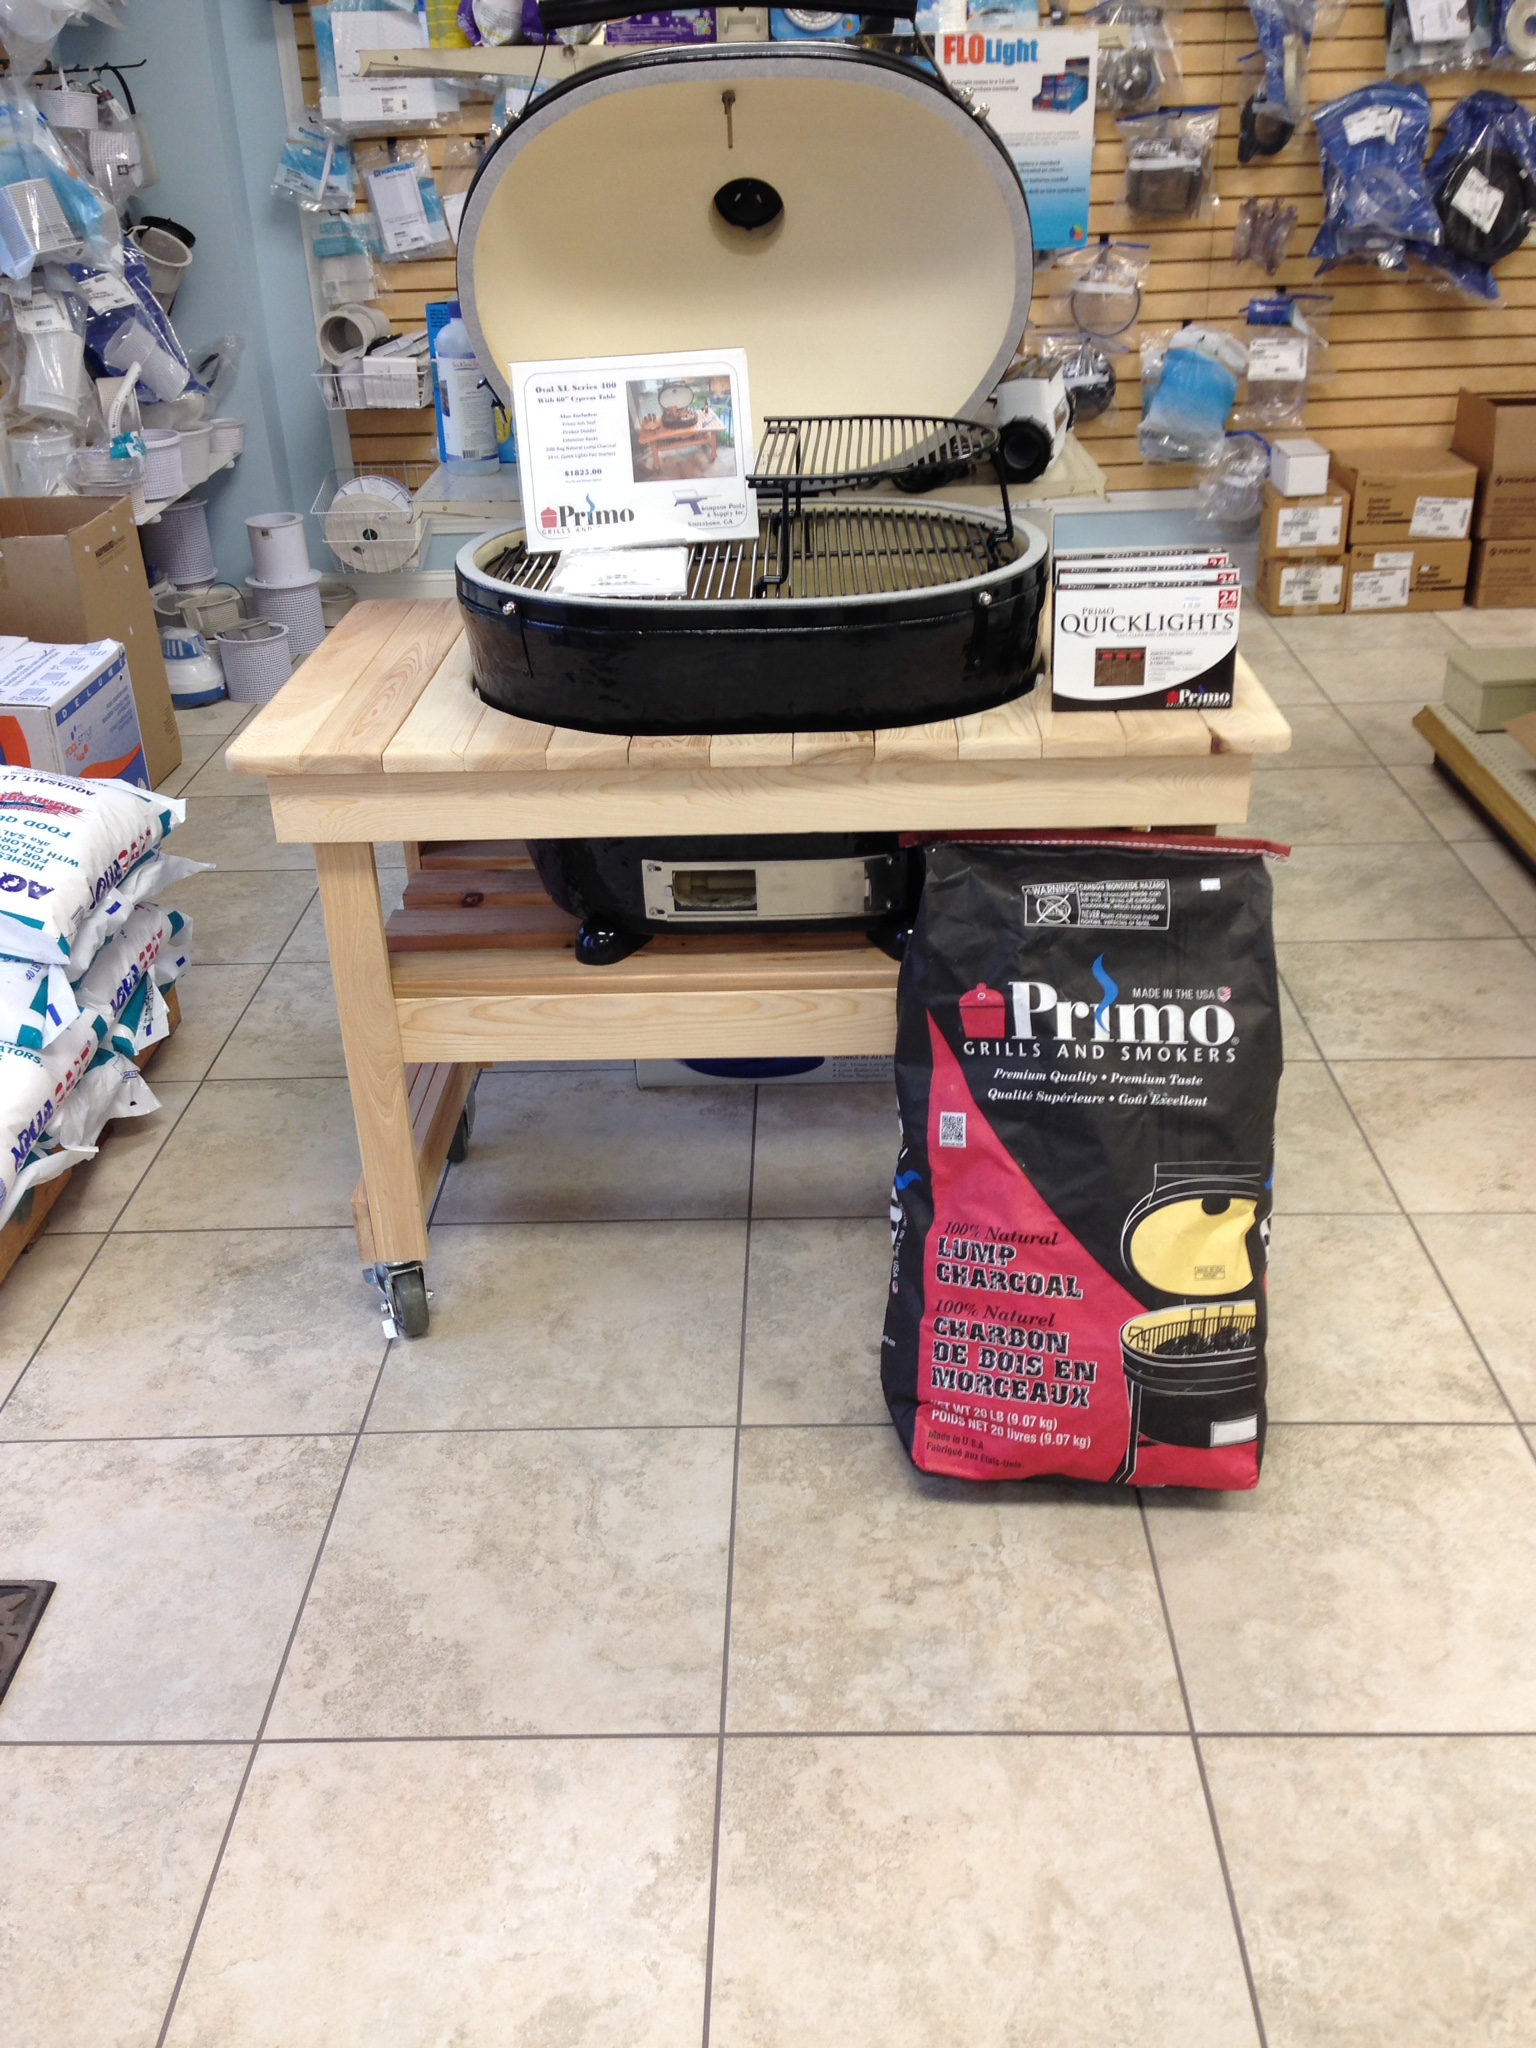 Primo Grills and Accessories | Outdoor Living | Outdoor Kitchen | Grill | Statesboro, GA | Thompson Pools and Supplies